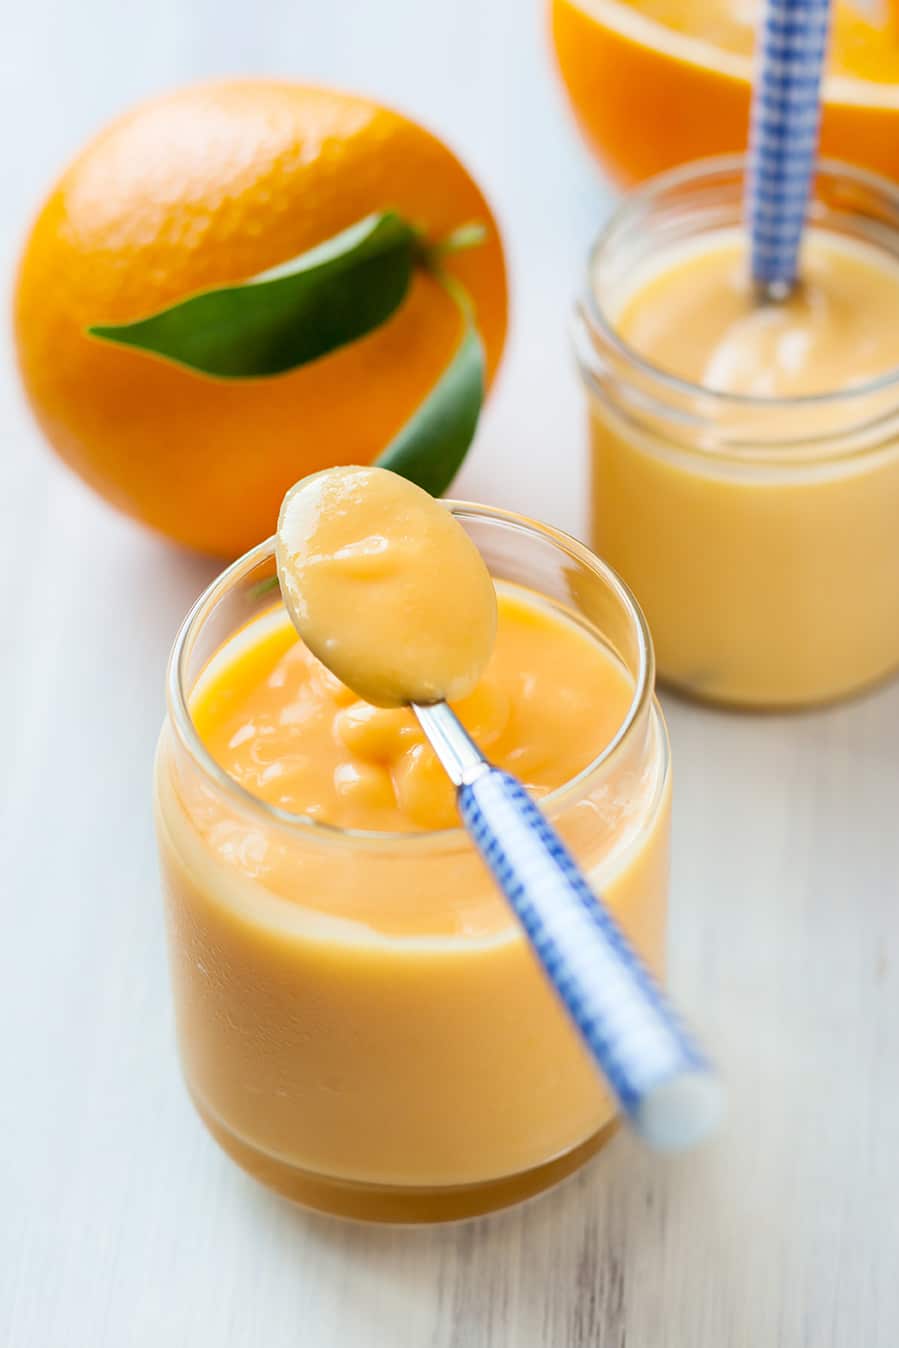 Easy Instant Pot Orange Curd :: Gluten-Free, Grain-Free, Refined Sugar Free, Dairy-Free Option // deliciousobsessions.com